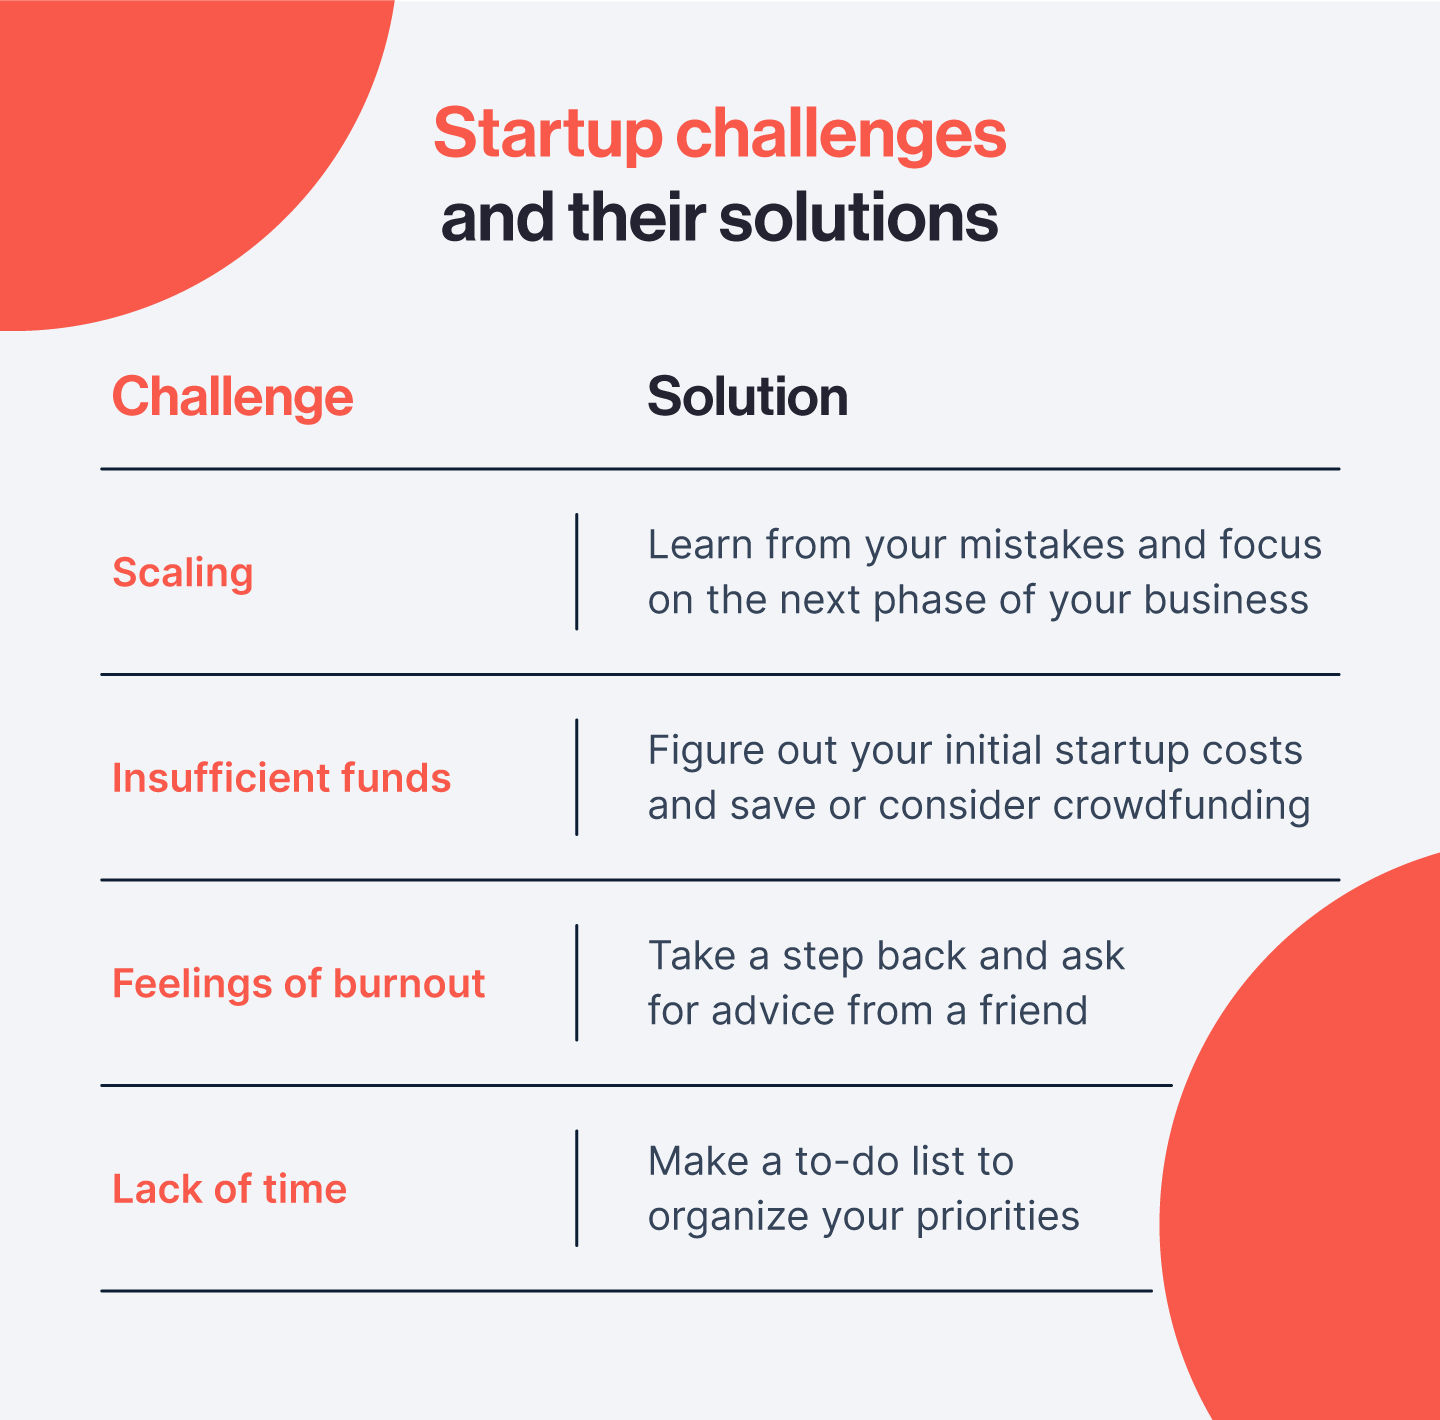 start-up-challenges-and-solutions.png